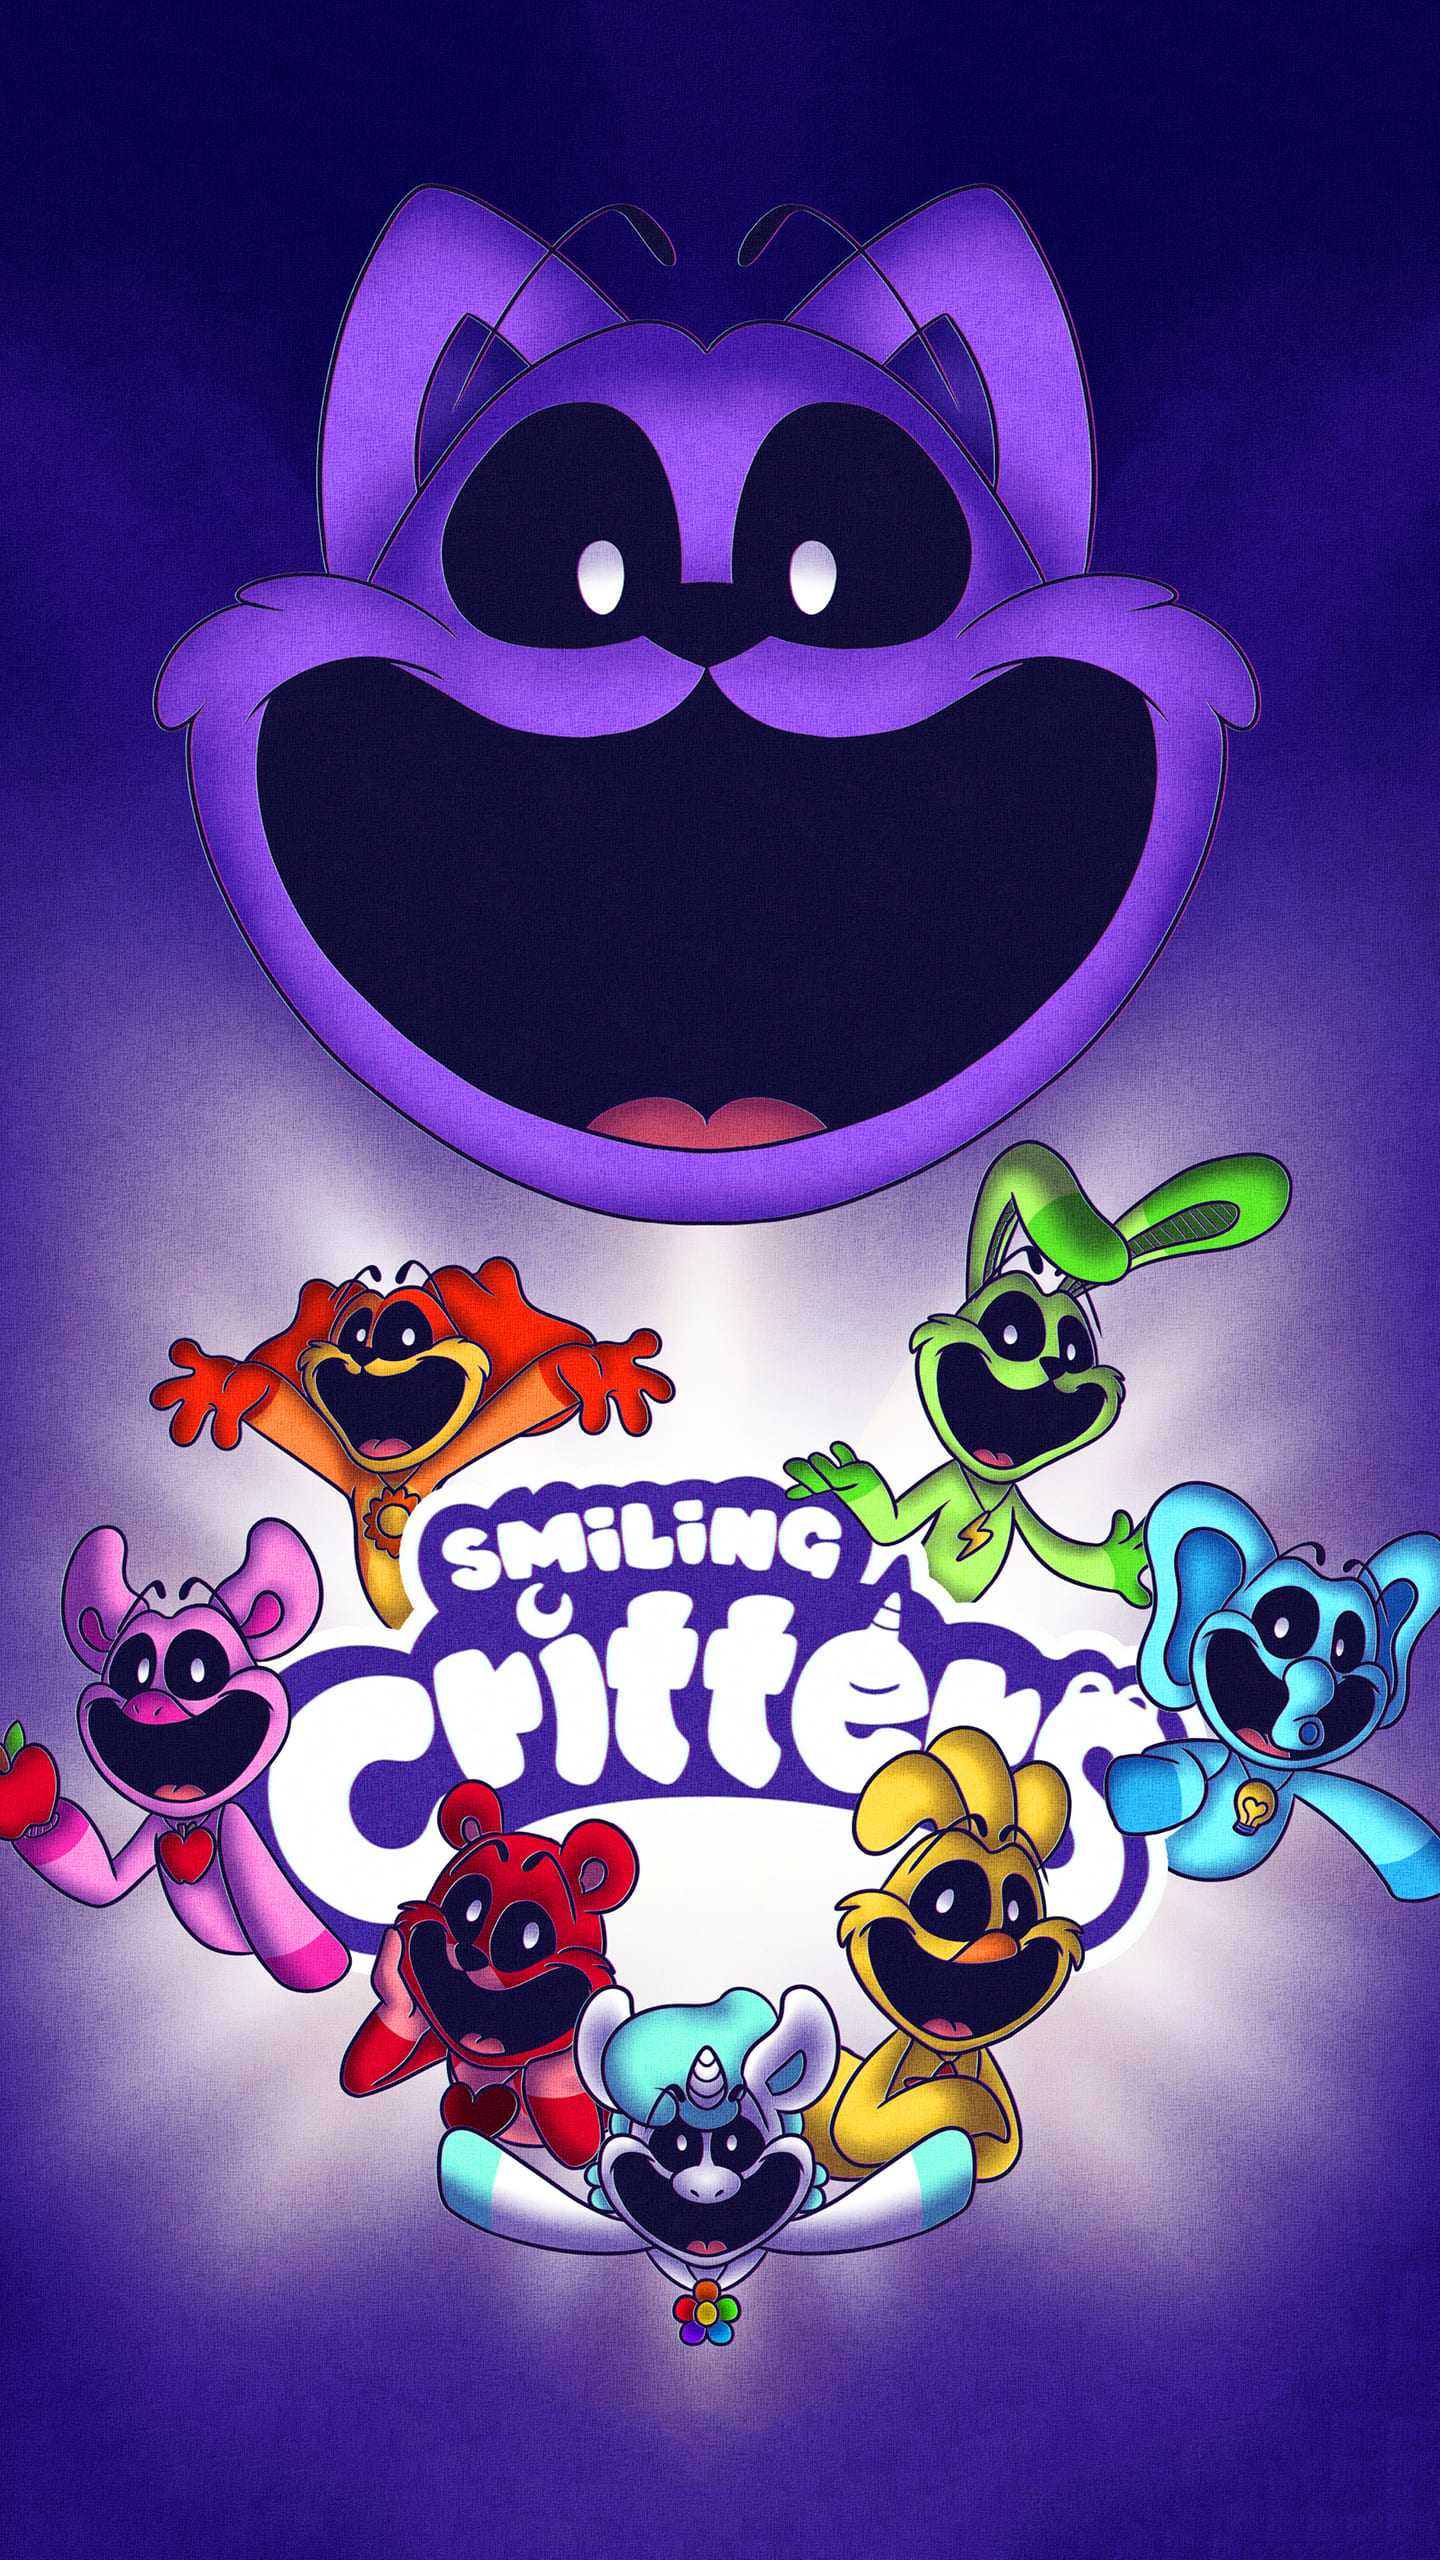 Background Smiling Critters Wallpaper